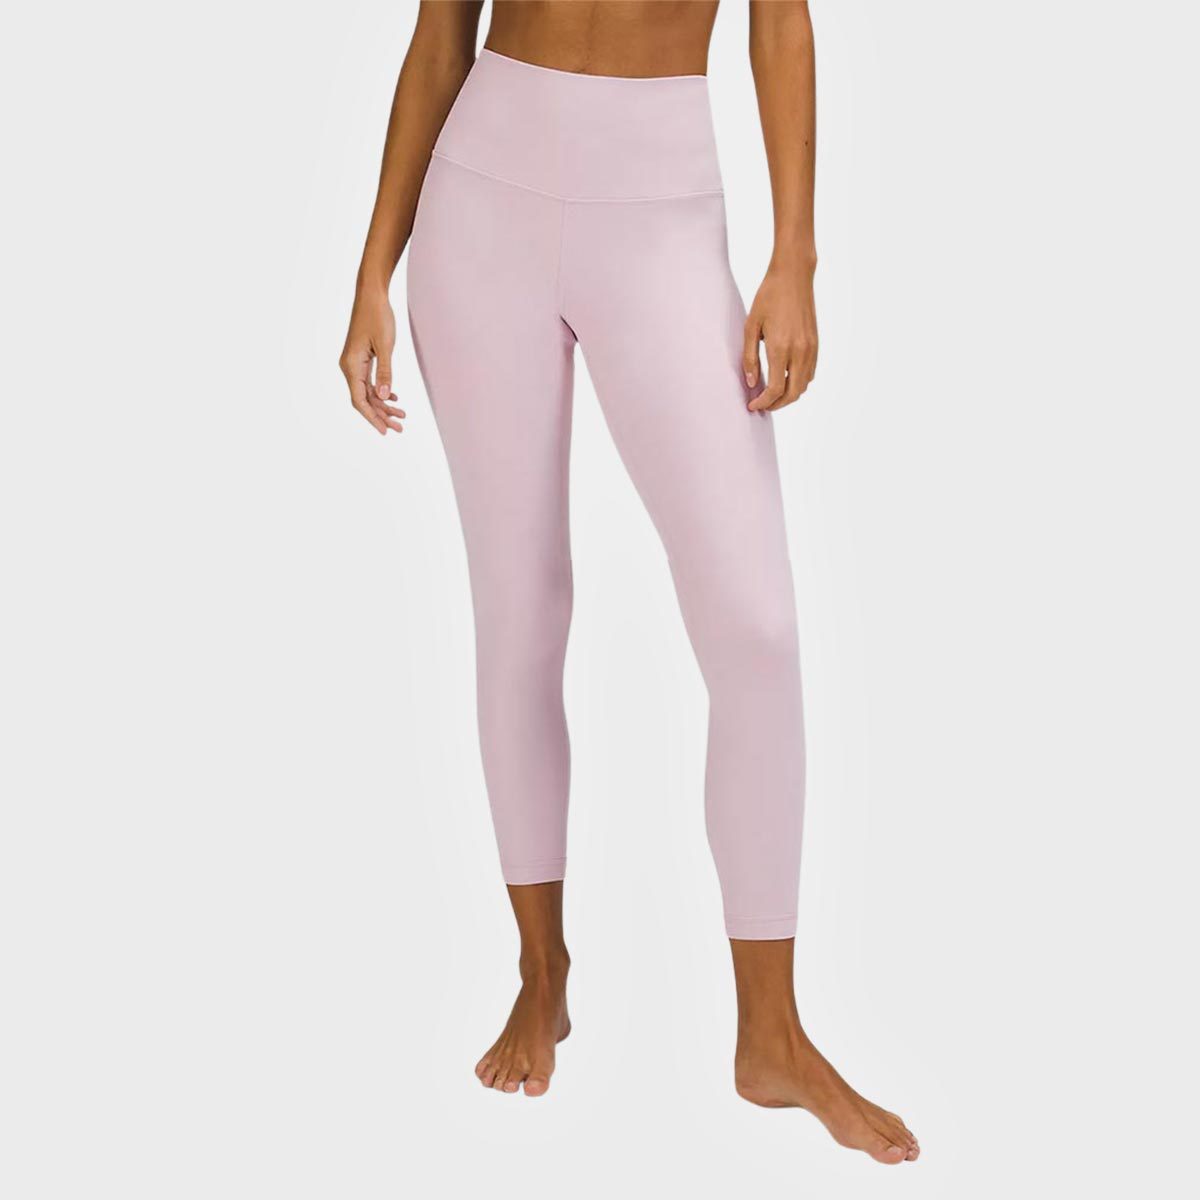 The Best Women's Activewear at Every Price Point: Leggings, Sports